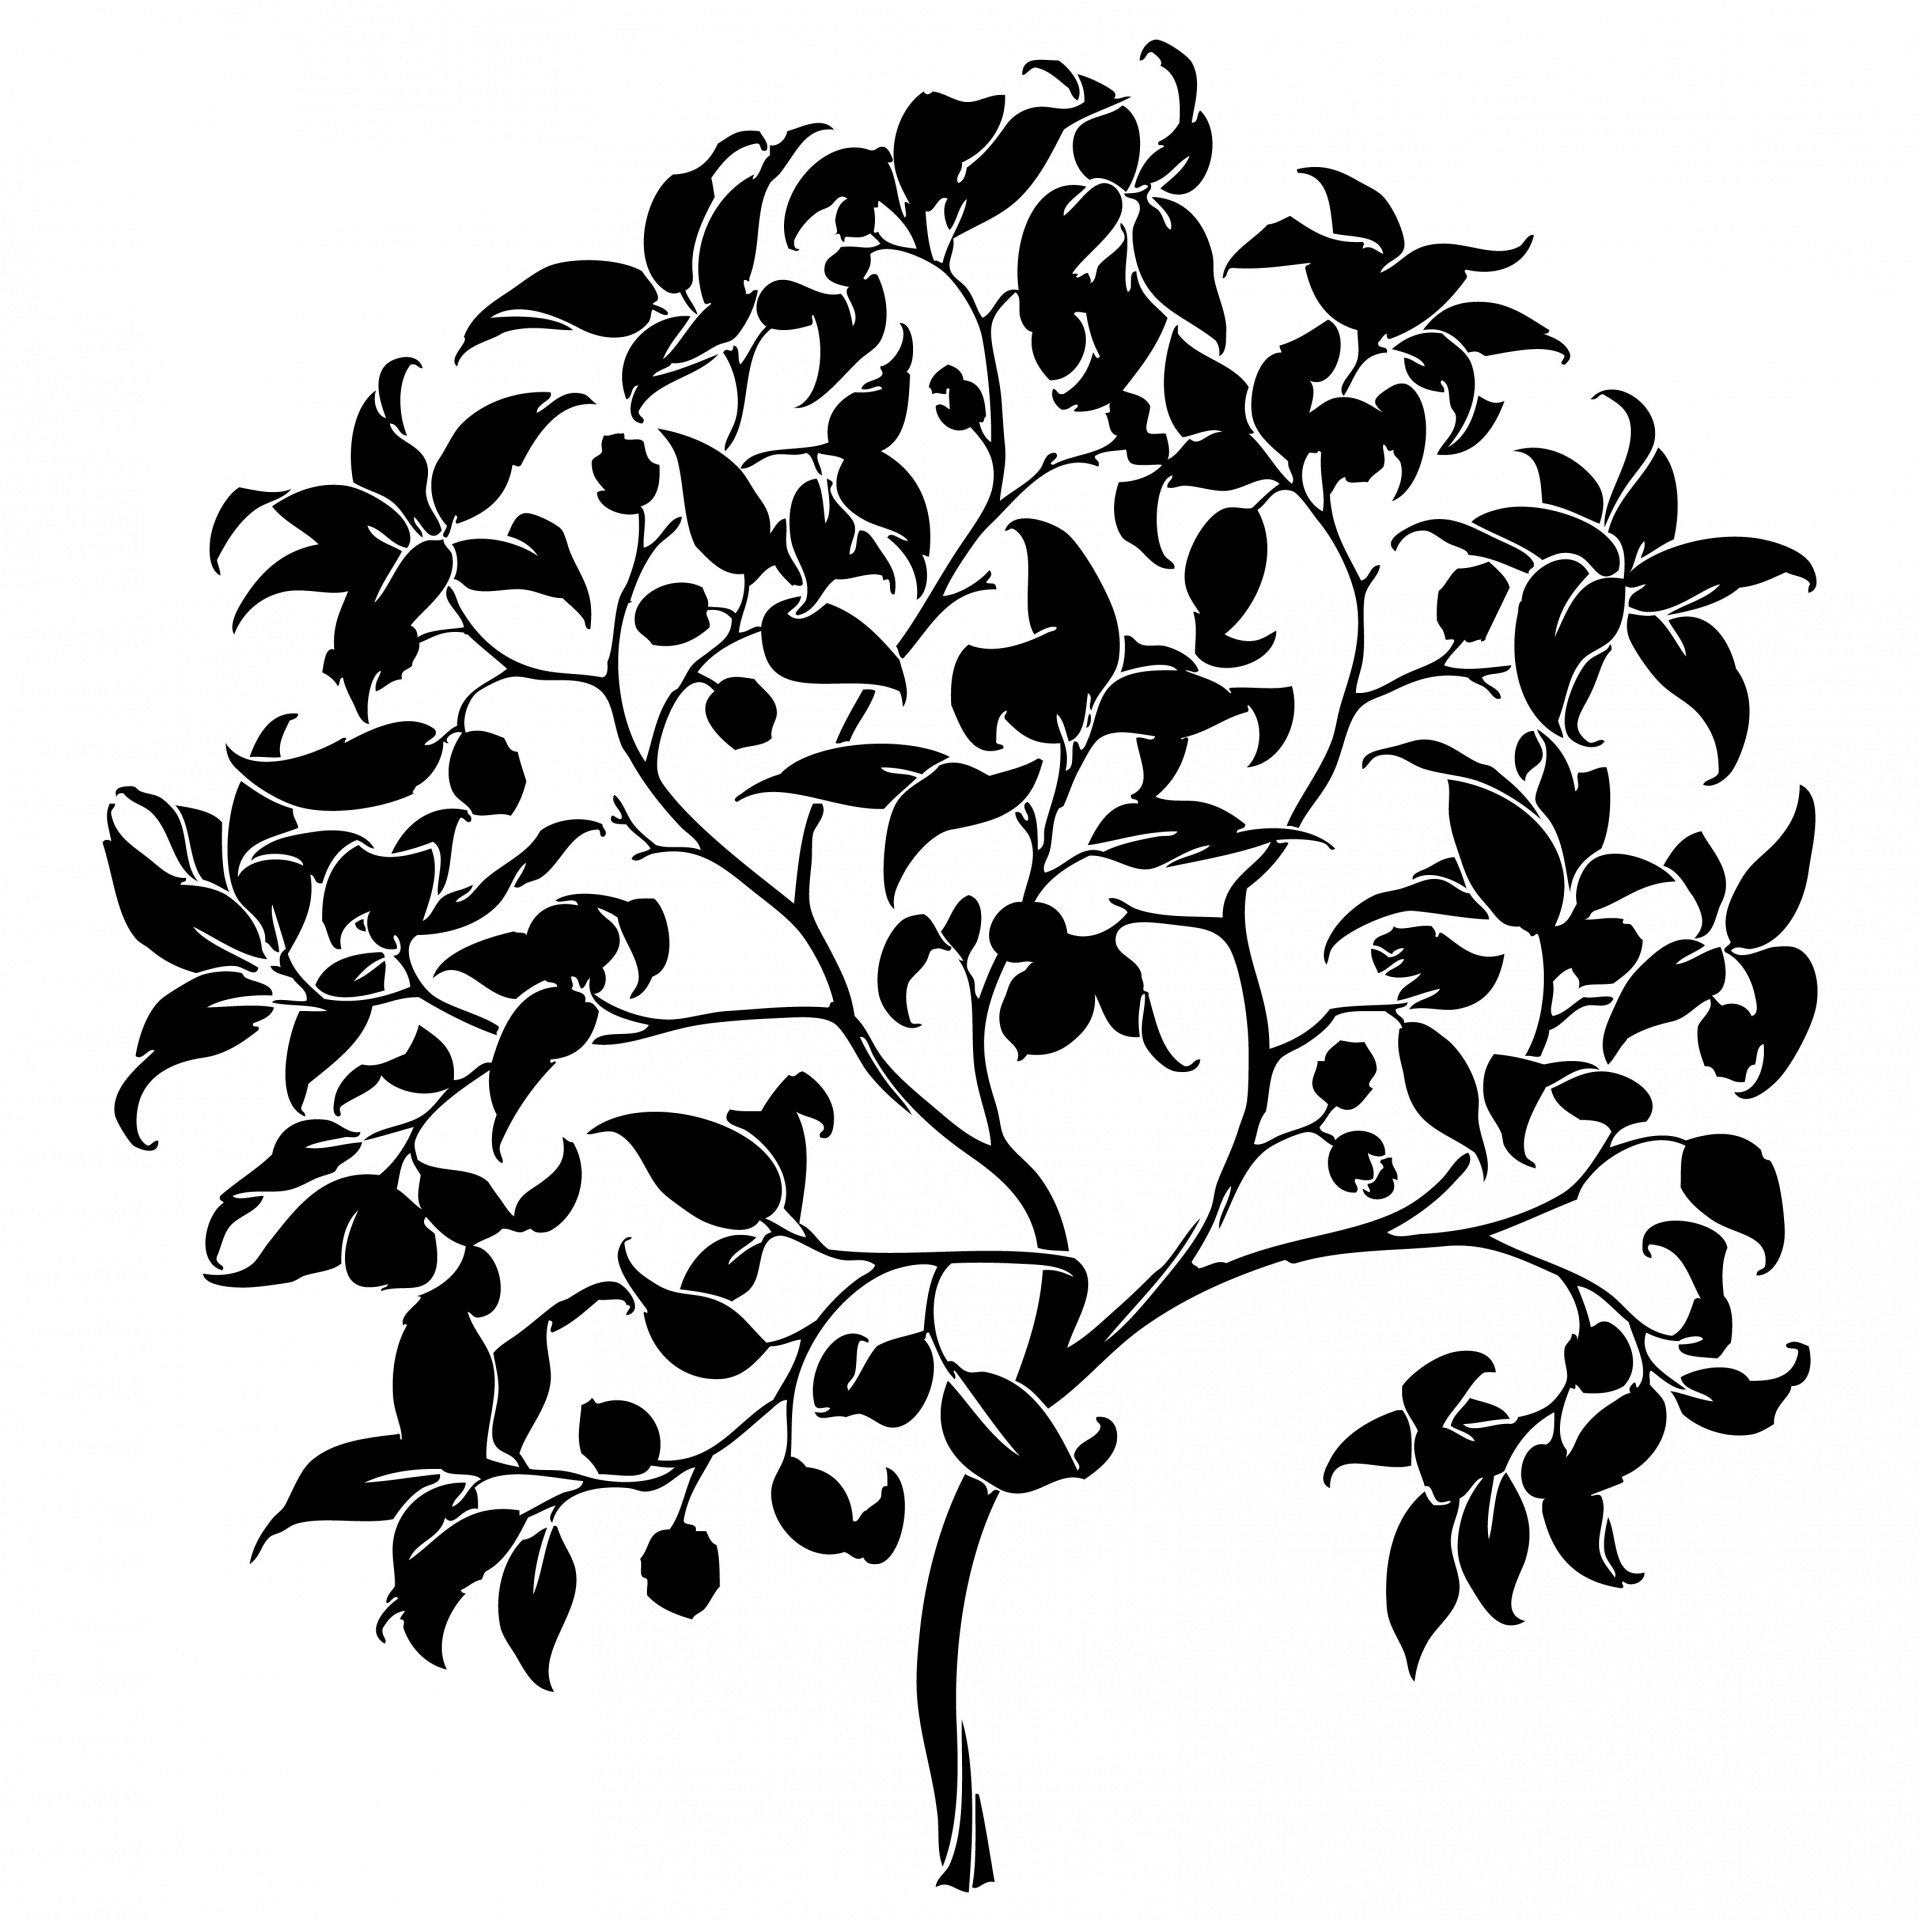 Black silhouette of a tree in leaf clipart